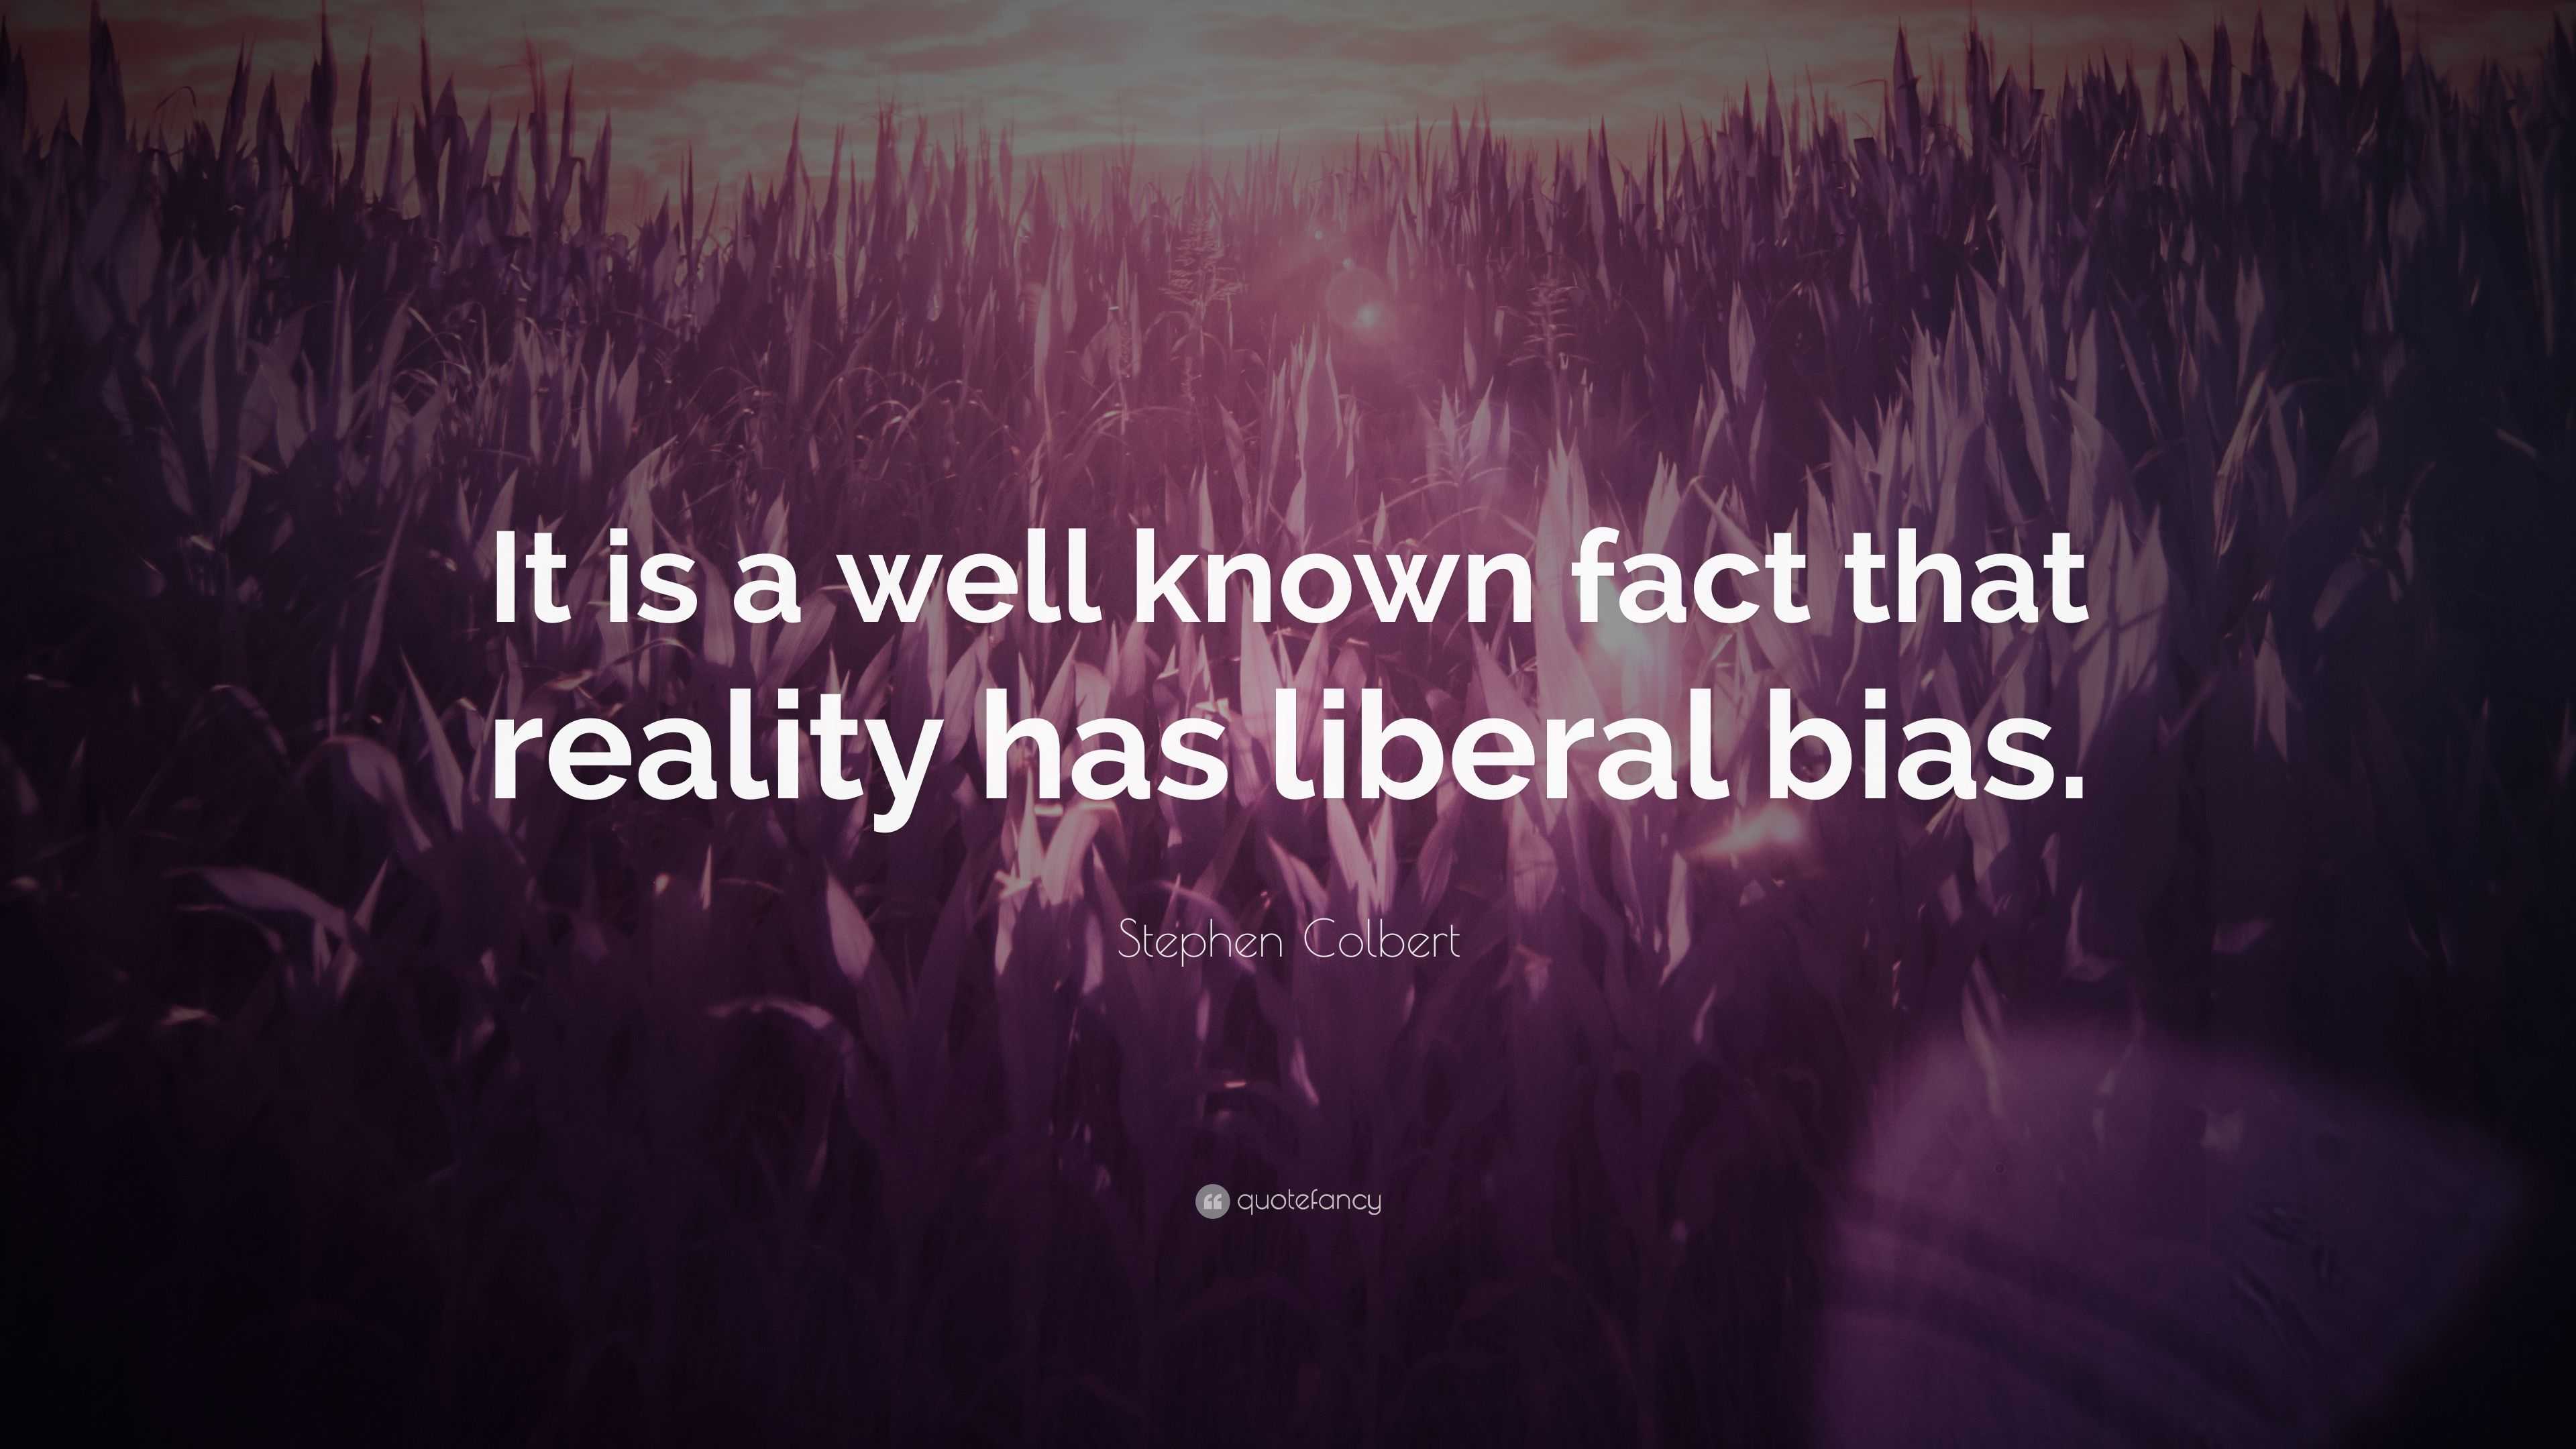 Stephen Colbert Quote “it Is A Well Known Fact That Reality Has Liberal Bias ”